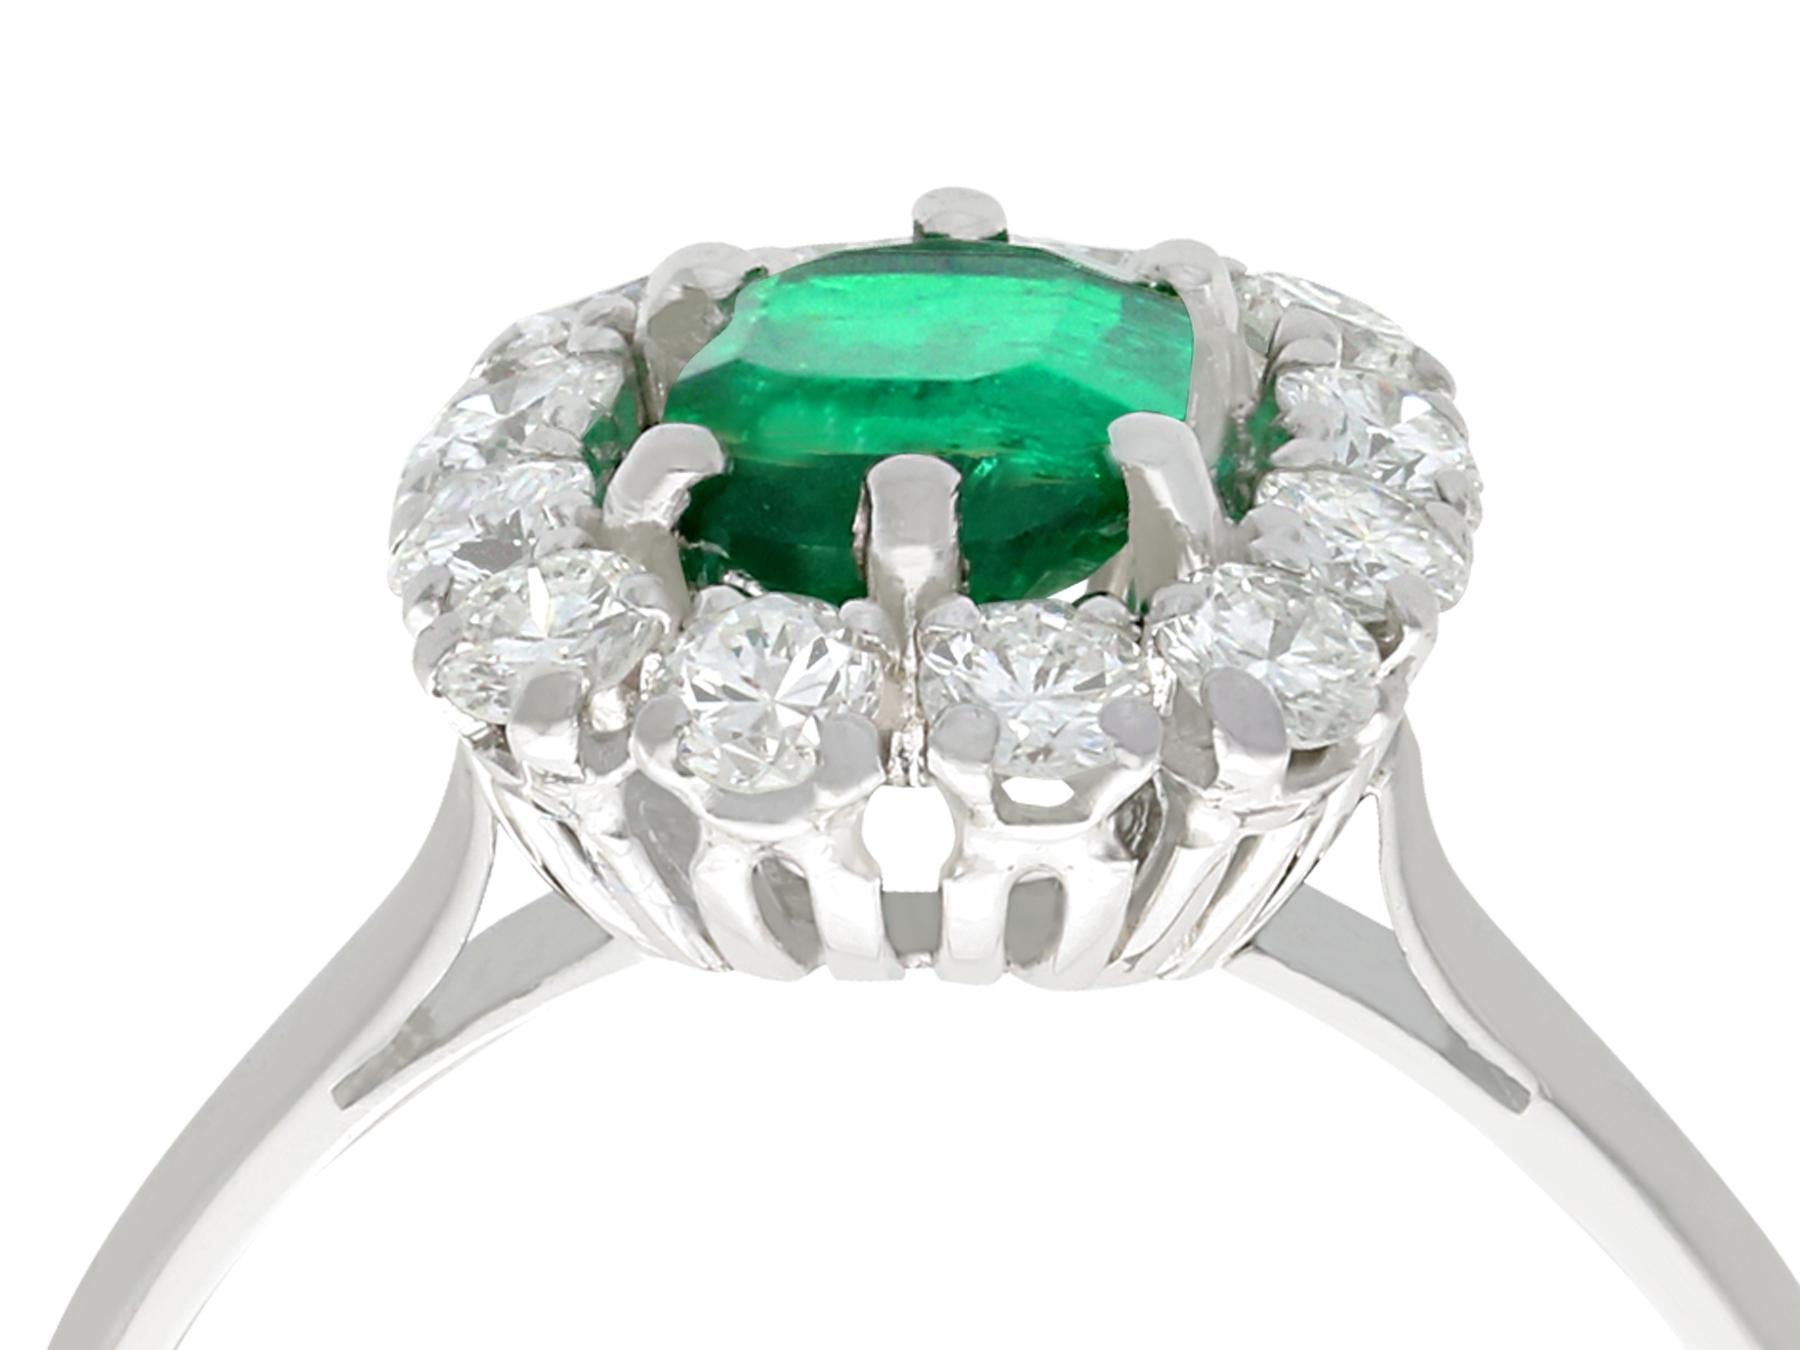 A fine and impressive 1.33 carat natural emerald and 0.90 carat diamond, 18 karat white gold vintage cocktail ring; an addition to our vintage estate jewelry collections.

This impressive vintage cocktail ring has been crafted in 18 karat white